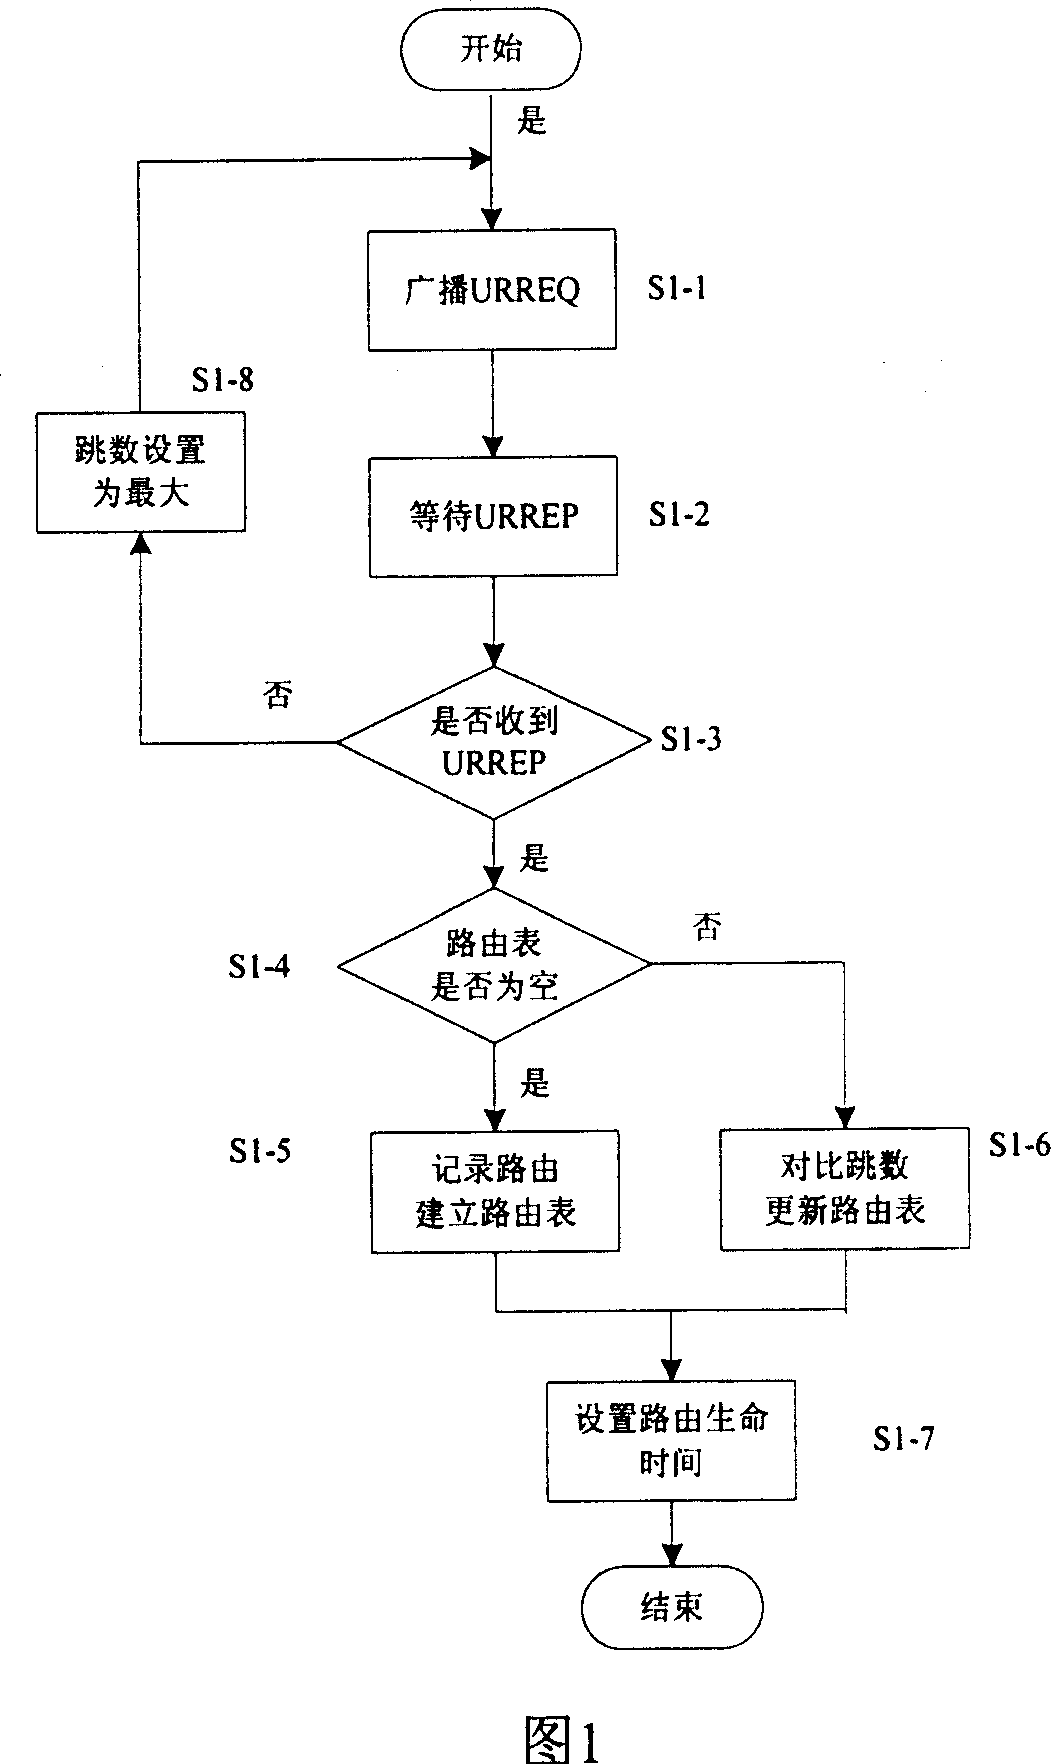 Radio senser network up and down isomeric routing method